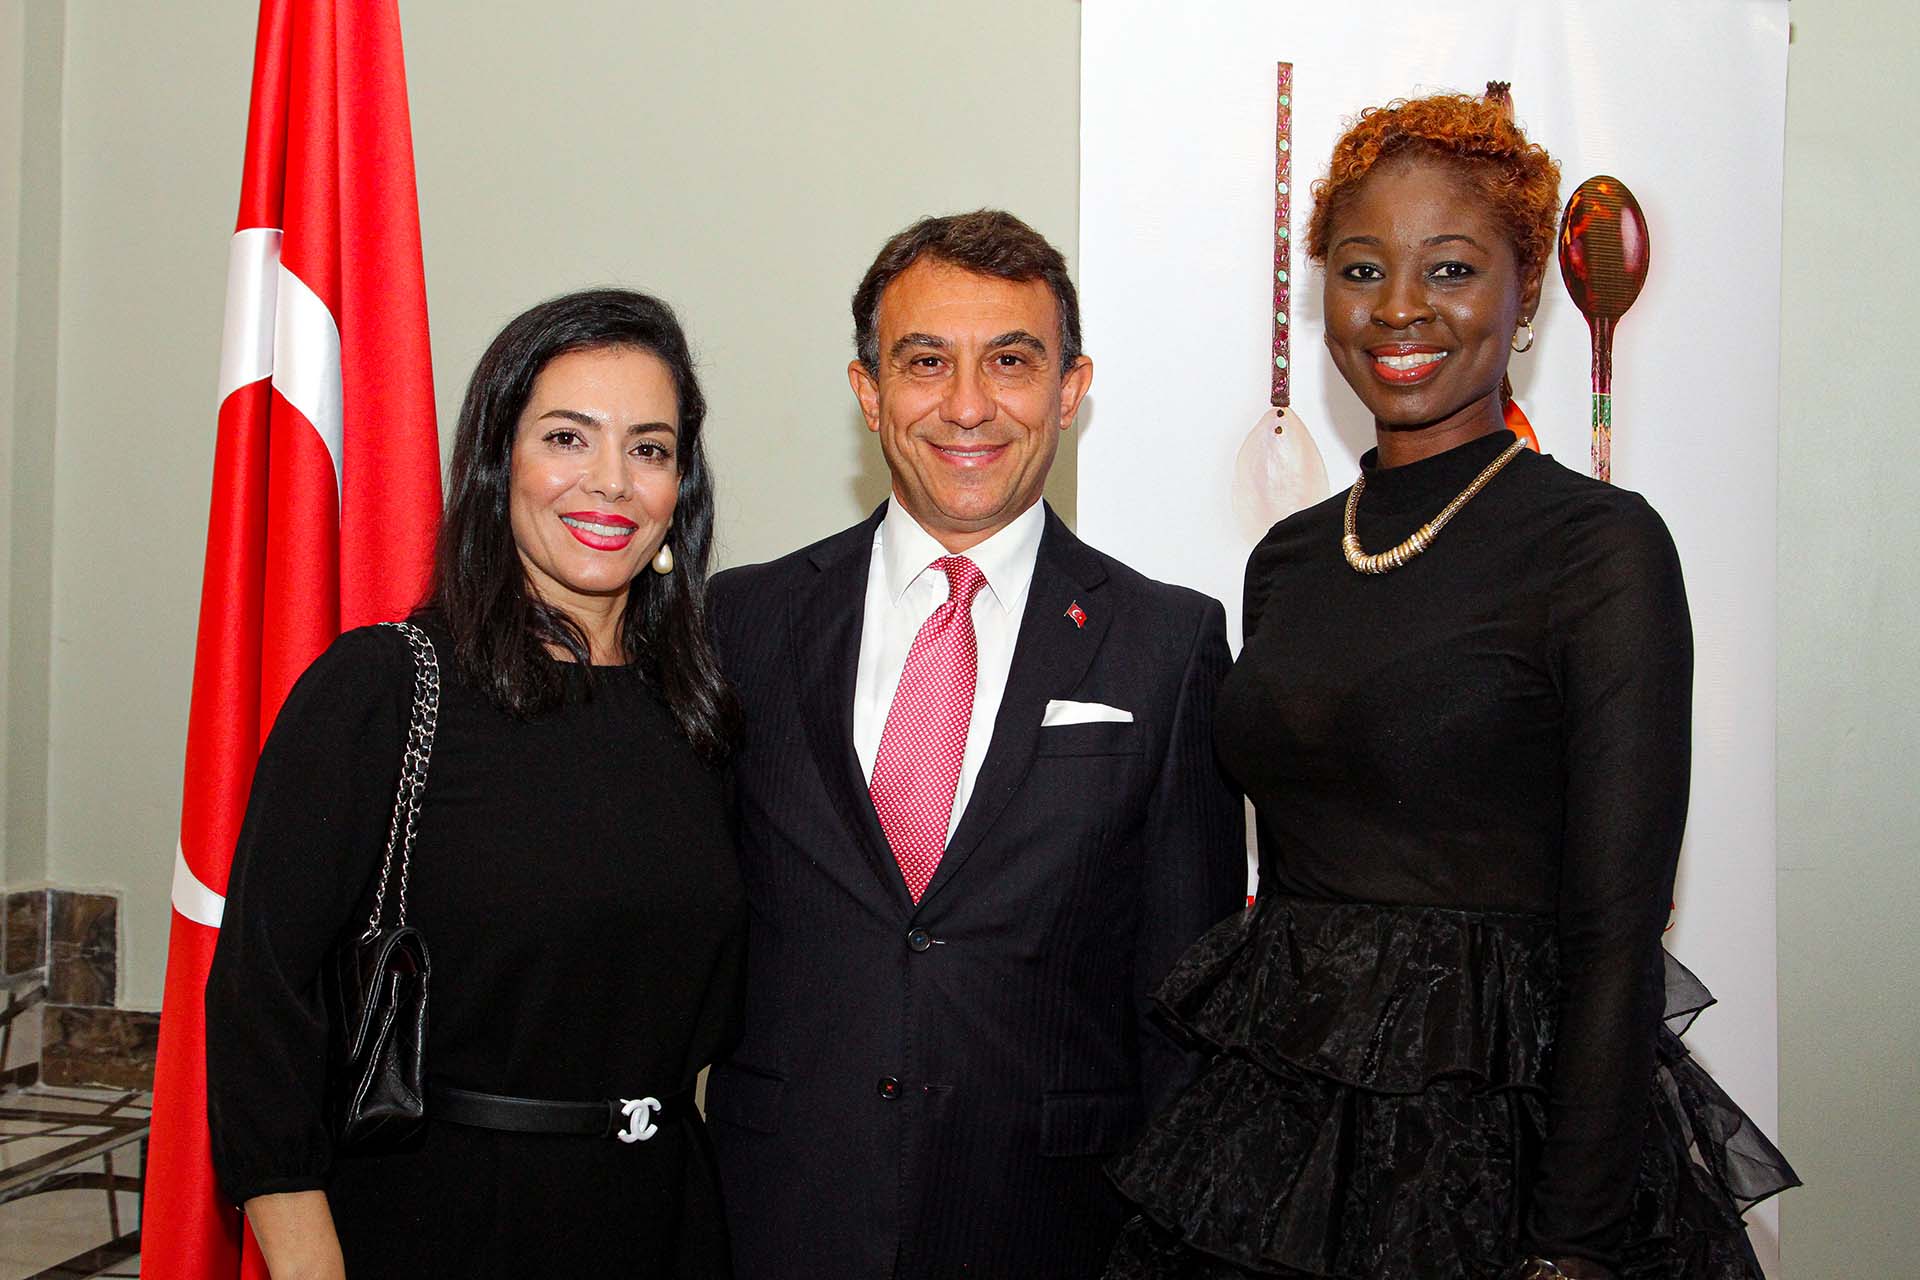 The CTBC was part of the Turkish Cuisine Week Dinner in Yaoundé